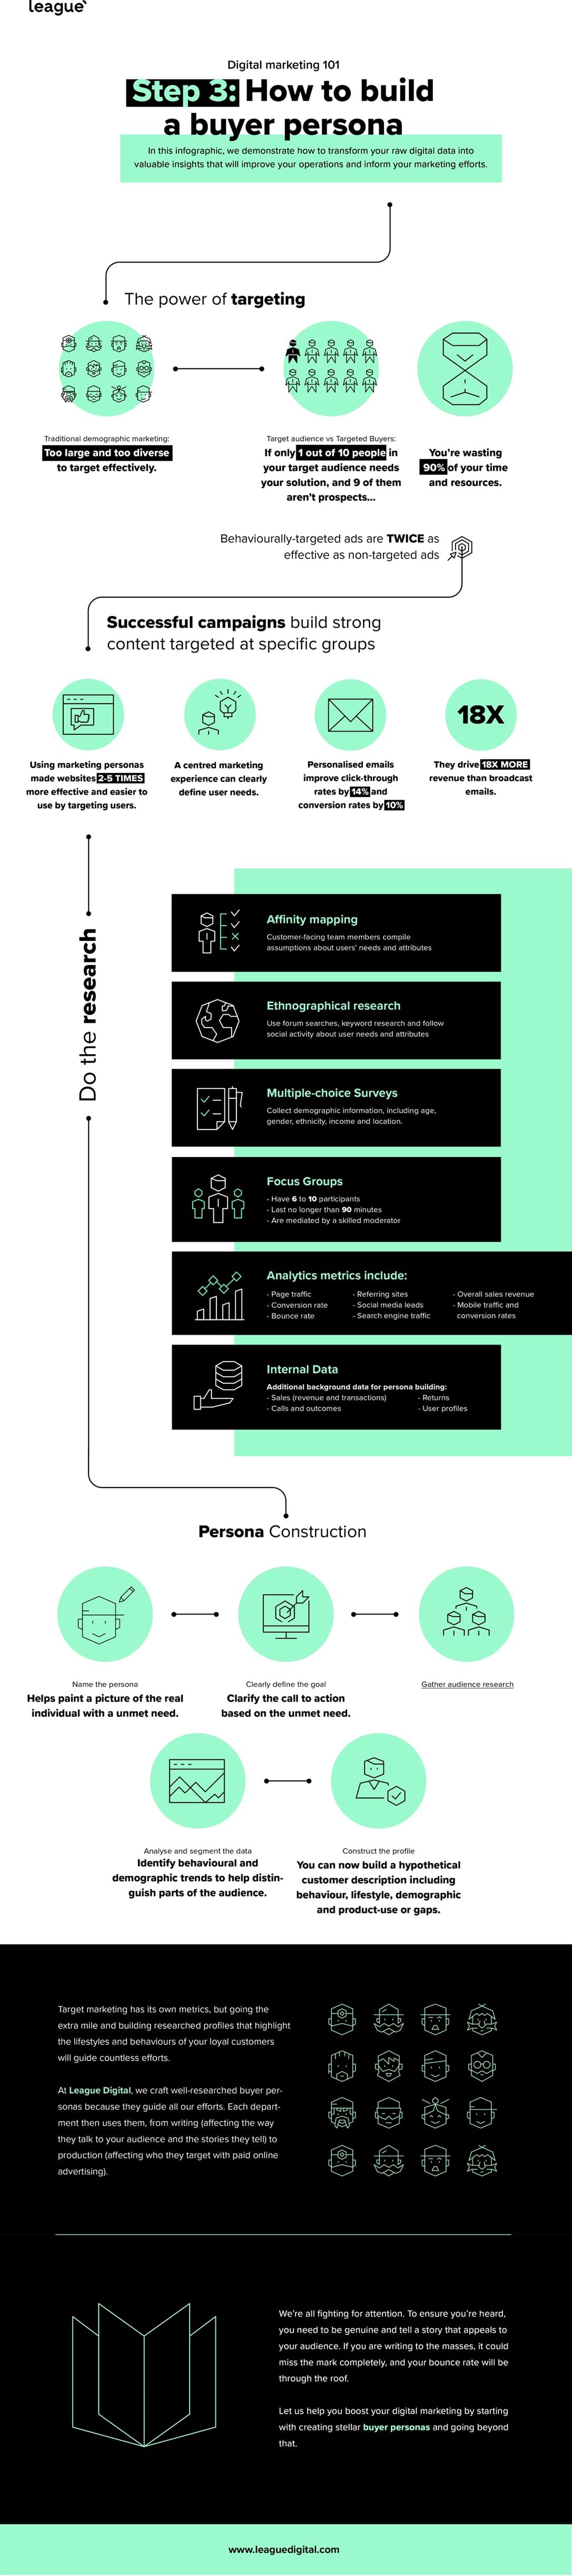 Digital marketing 101: Step 3 - How to build a buyer persona infographic